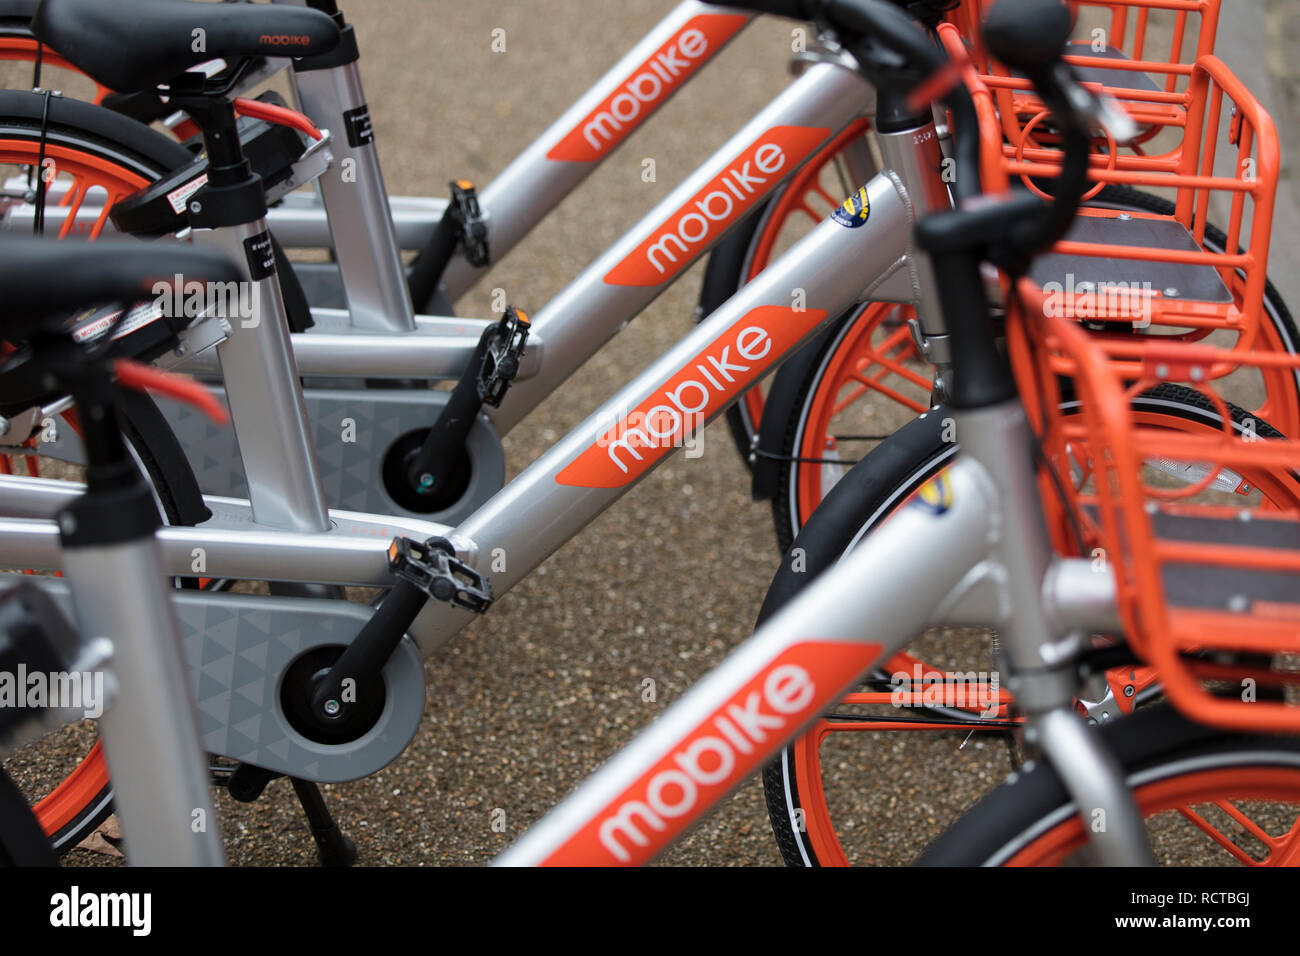 LONDON, ENGLAND - JANUARY 15, 2019: Mobike dockless bicycles parked in a street. Mobike is a bike sharing platform for short distance travel. Stock Photo